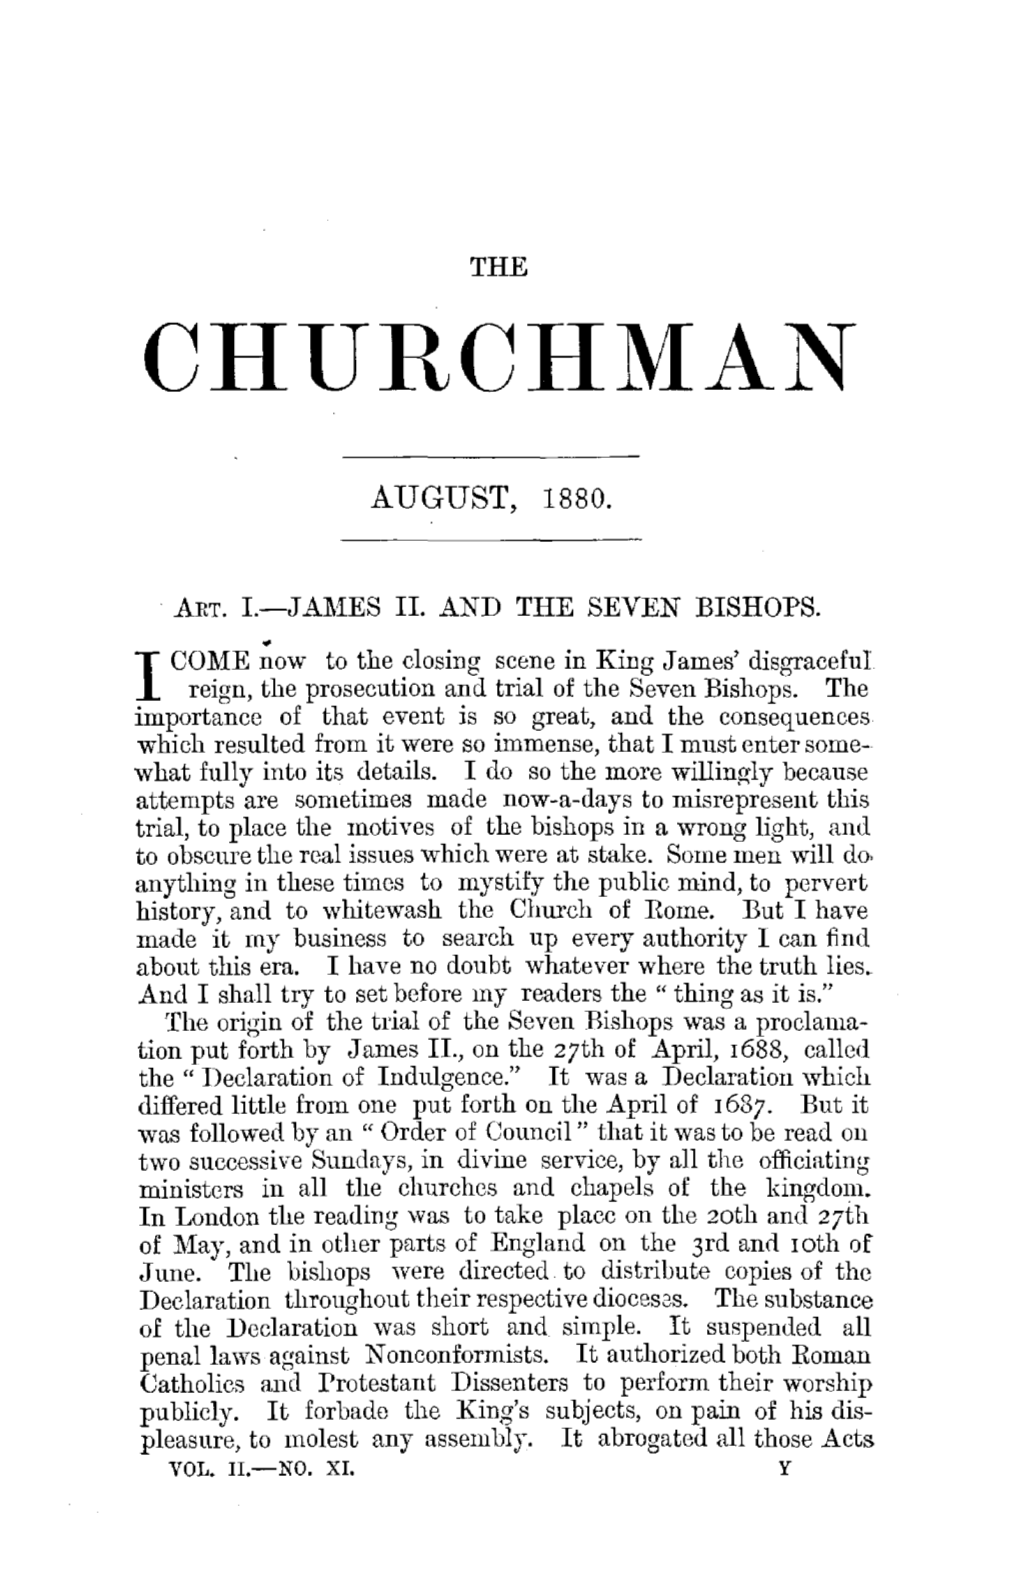 "James II, and the Seven Bishops," the Churchman